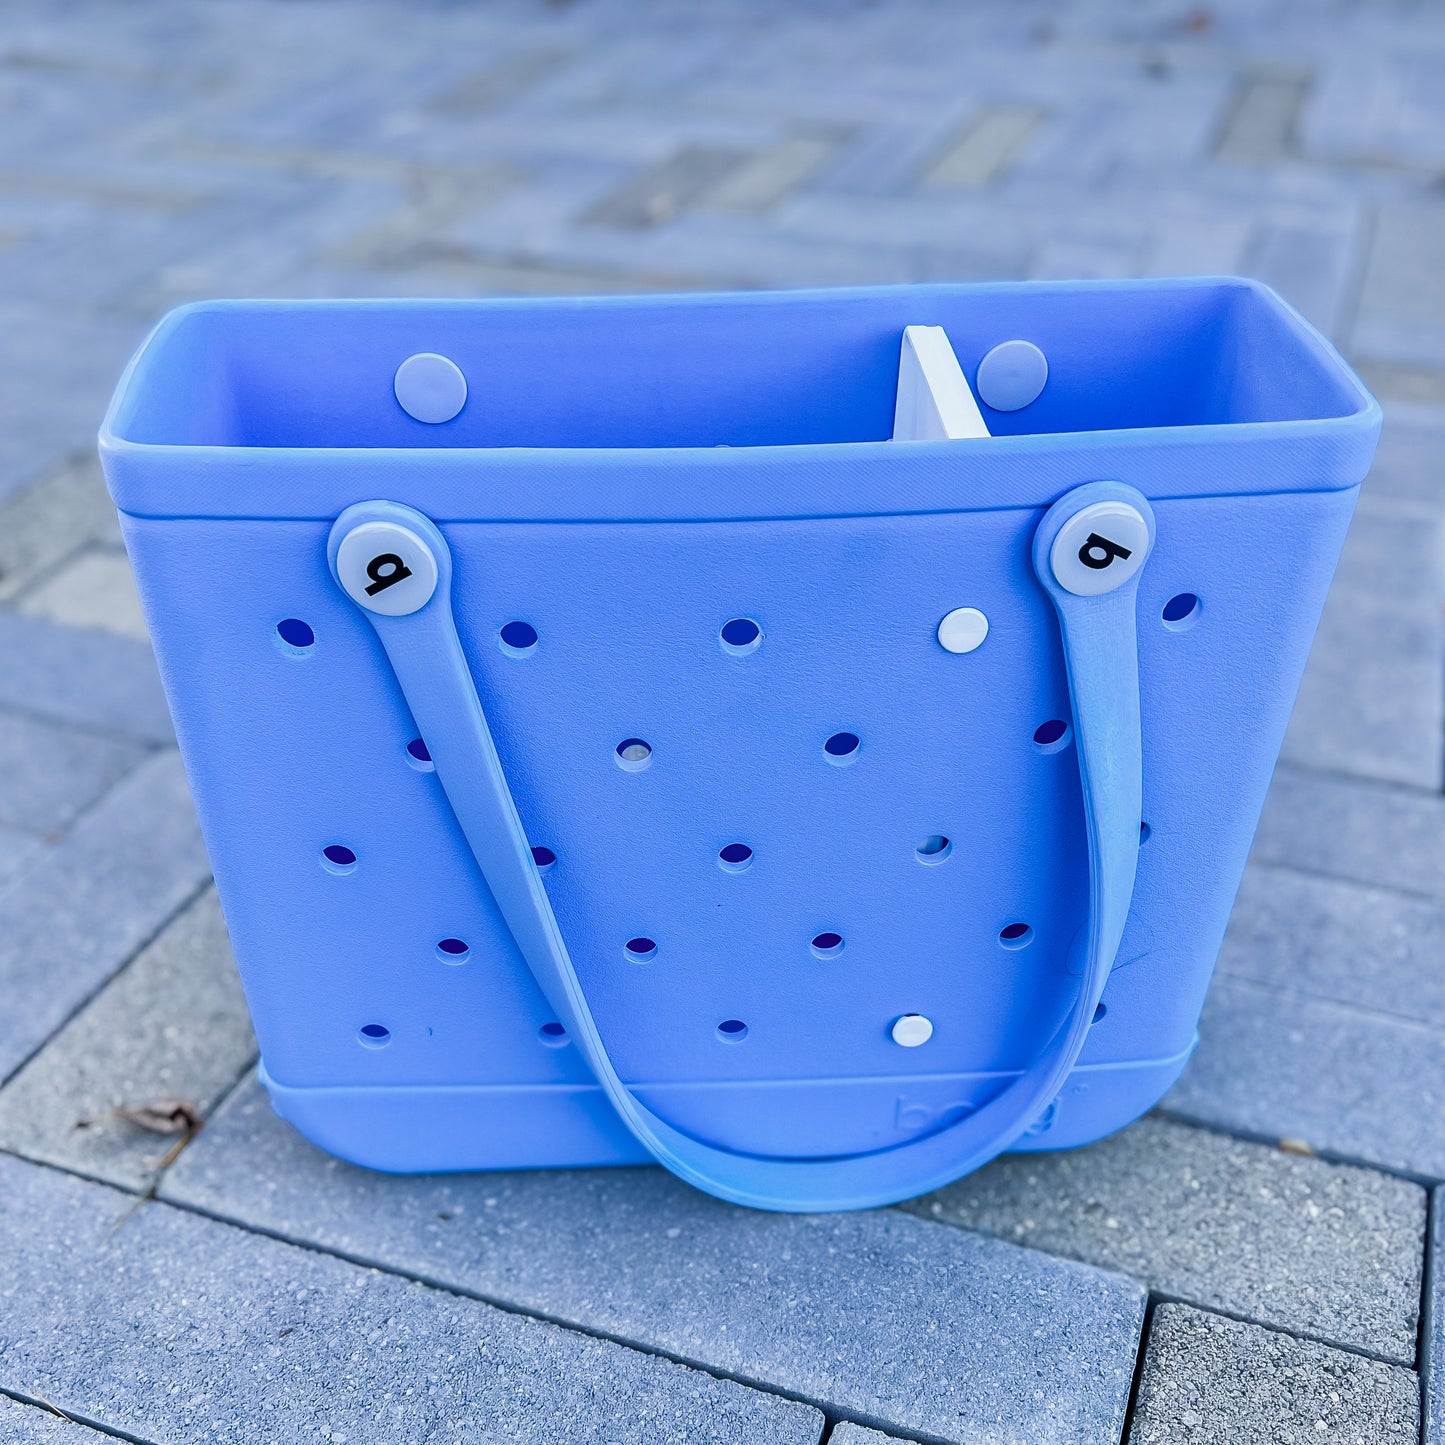 Divider Tray For The Baby Size Bogg Bag